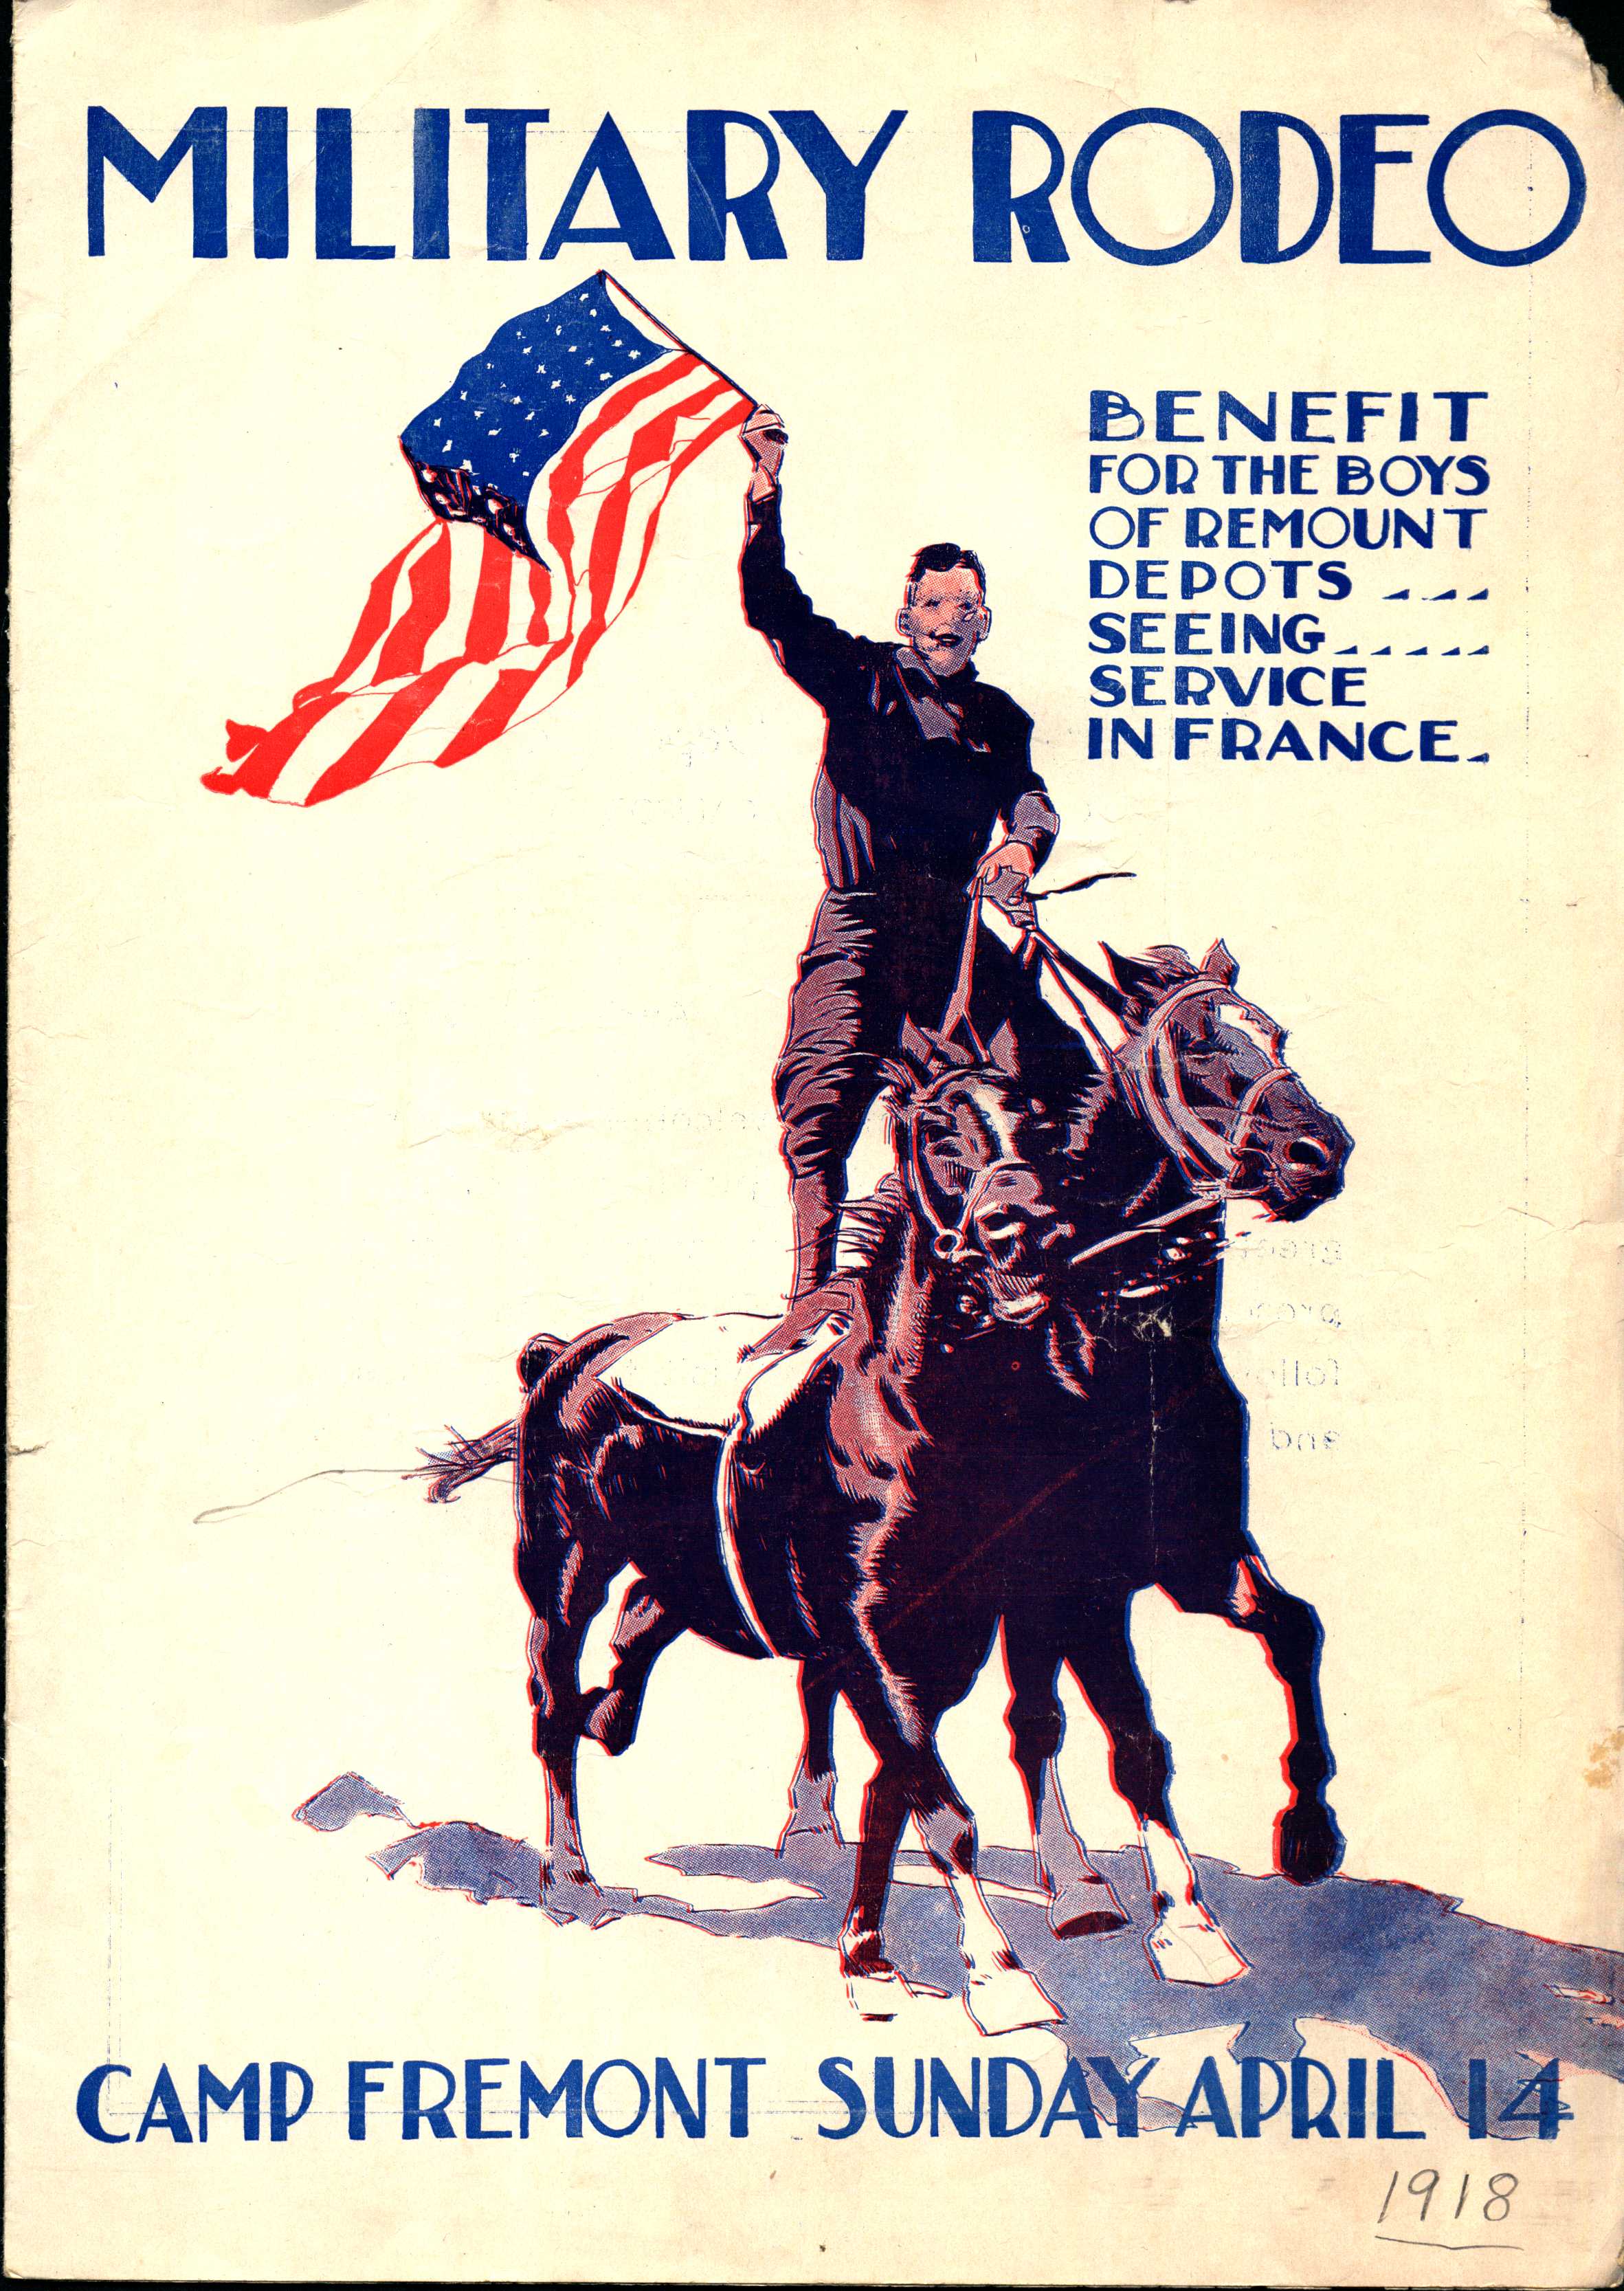 Cover shows man standing on two galloping horses while waving a flag